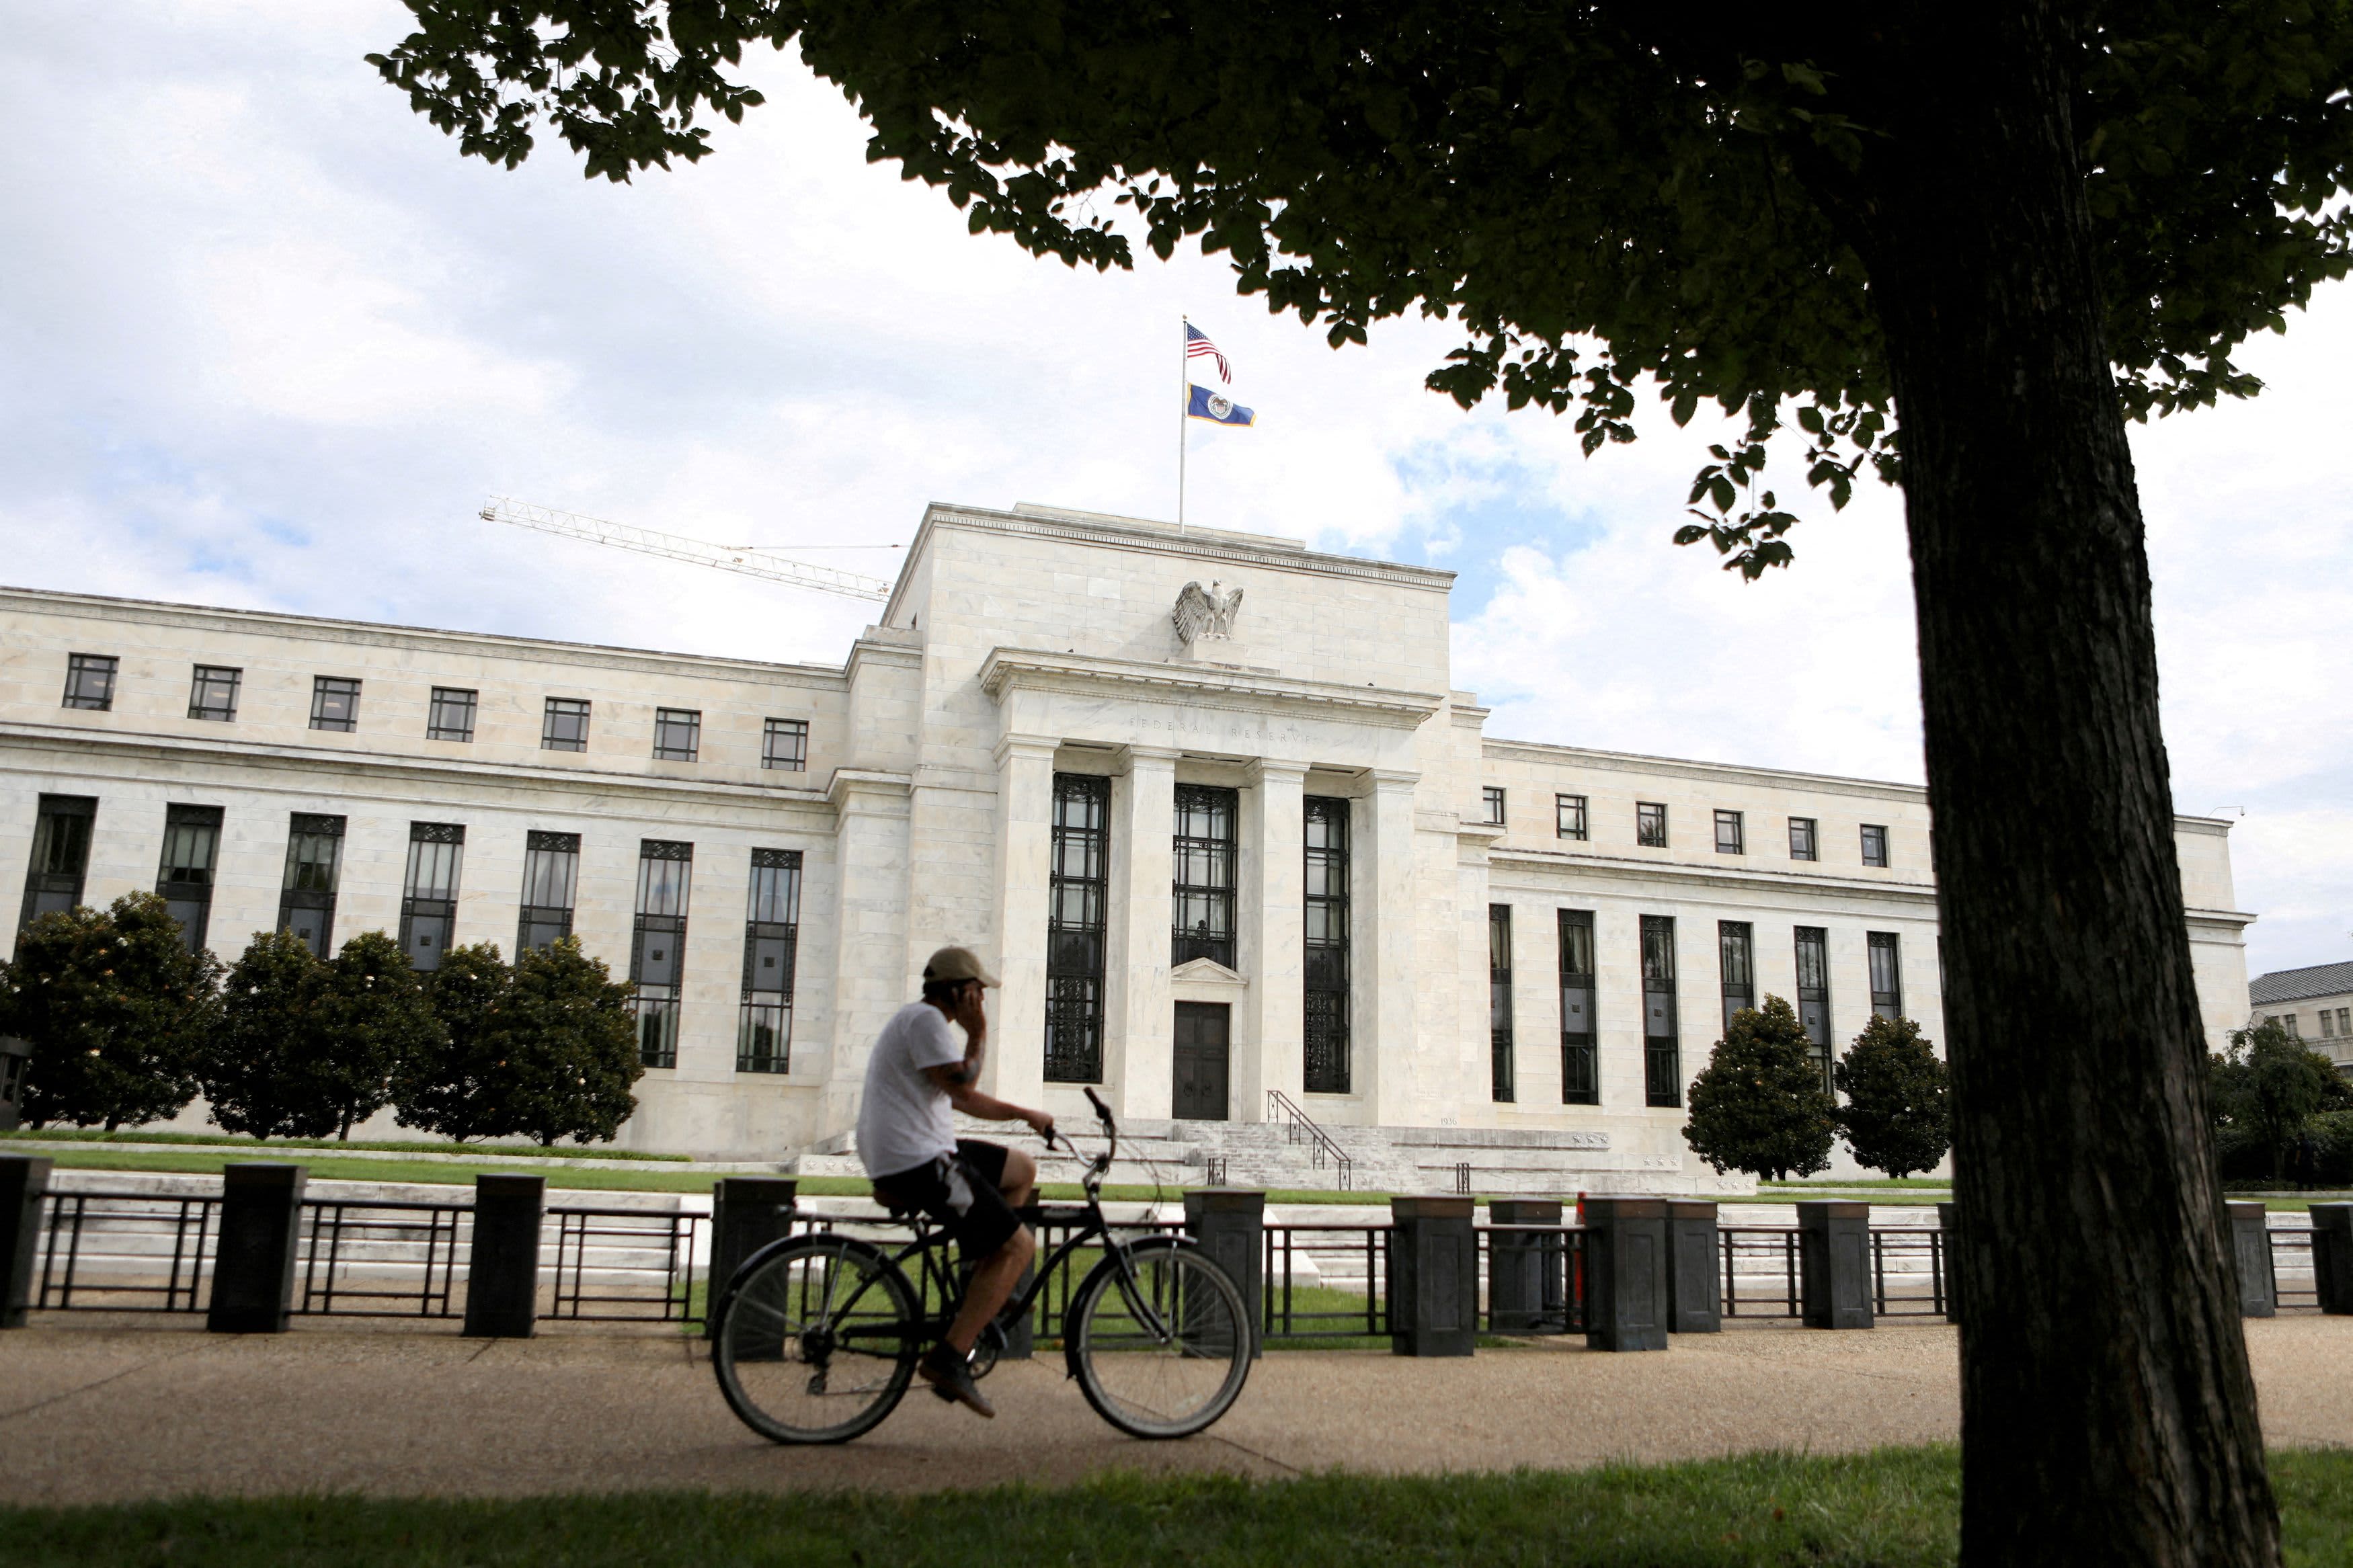 The portfolio manager says the Fed should cut interest rates at least 5 times next year